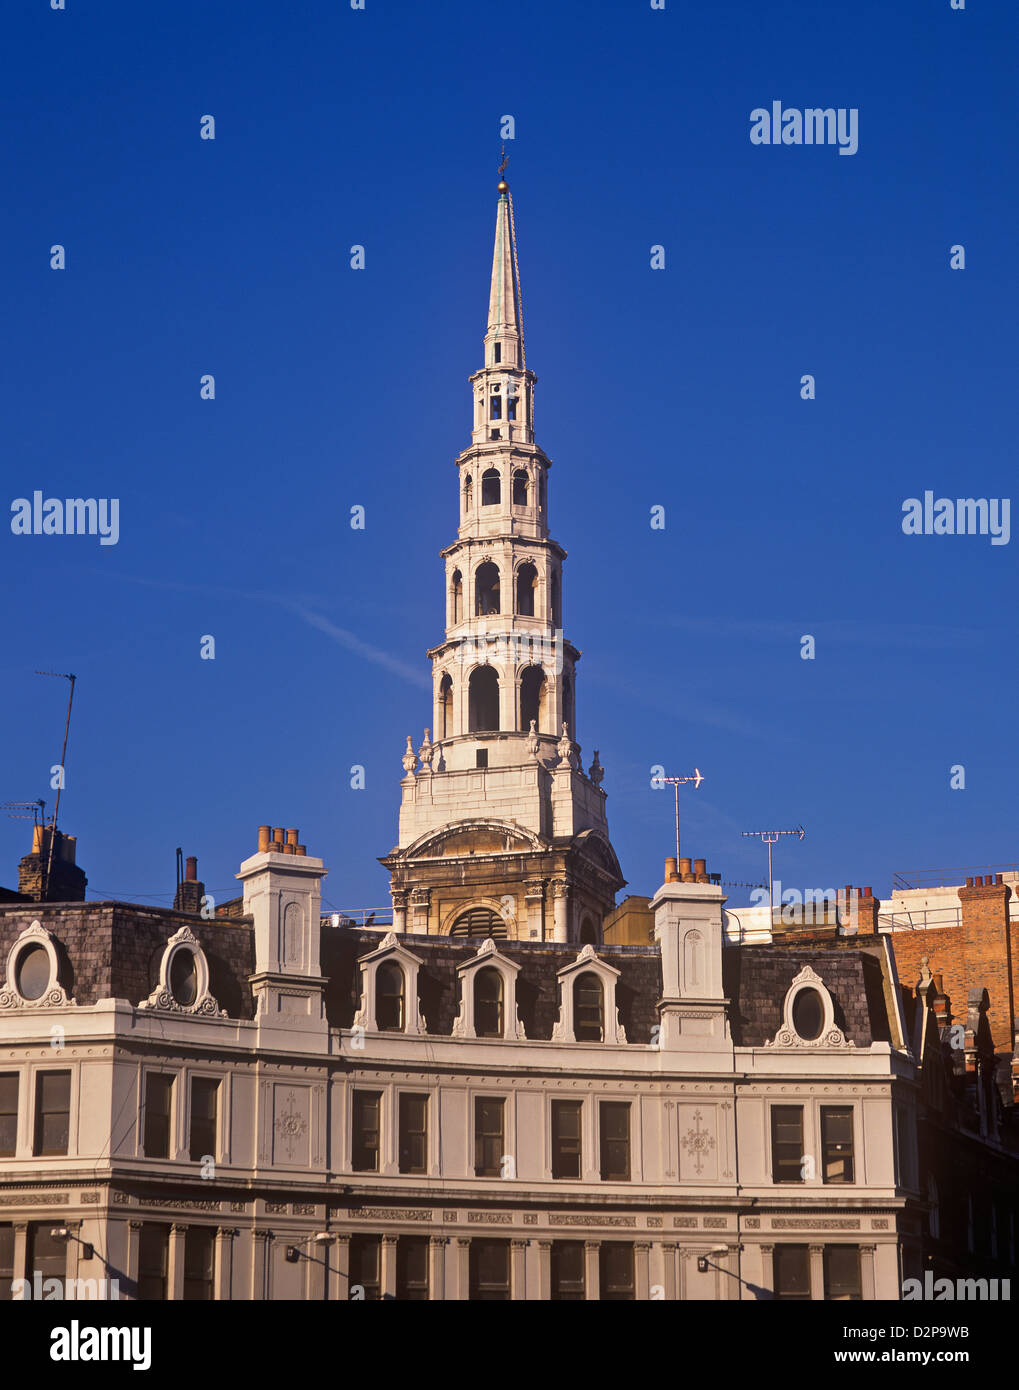 The steeple of St Bride's Church, Fleet Street, London. A masterpiece by the architect Christopher Wren. Stock Photo